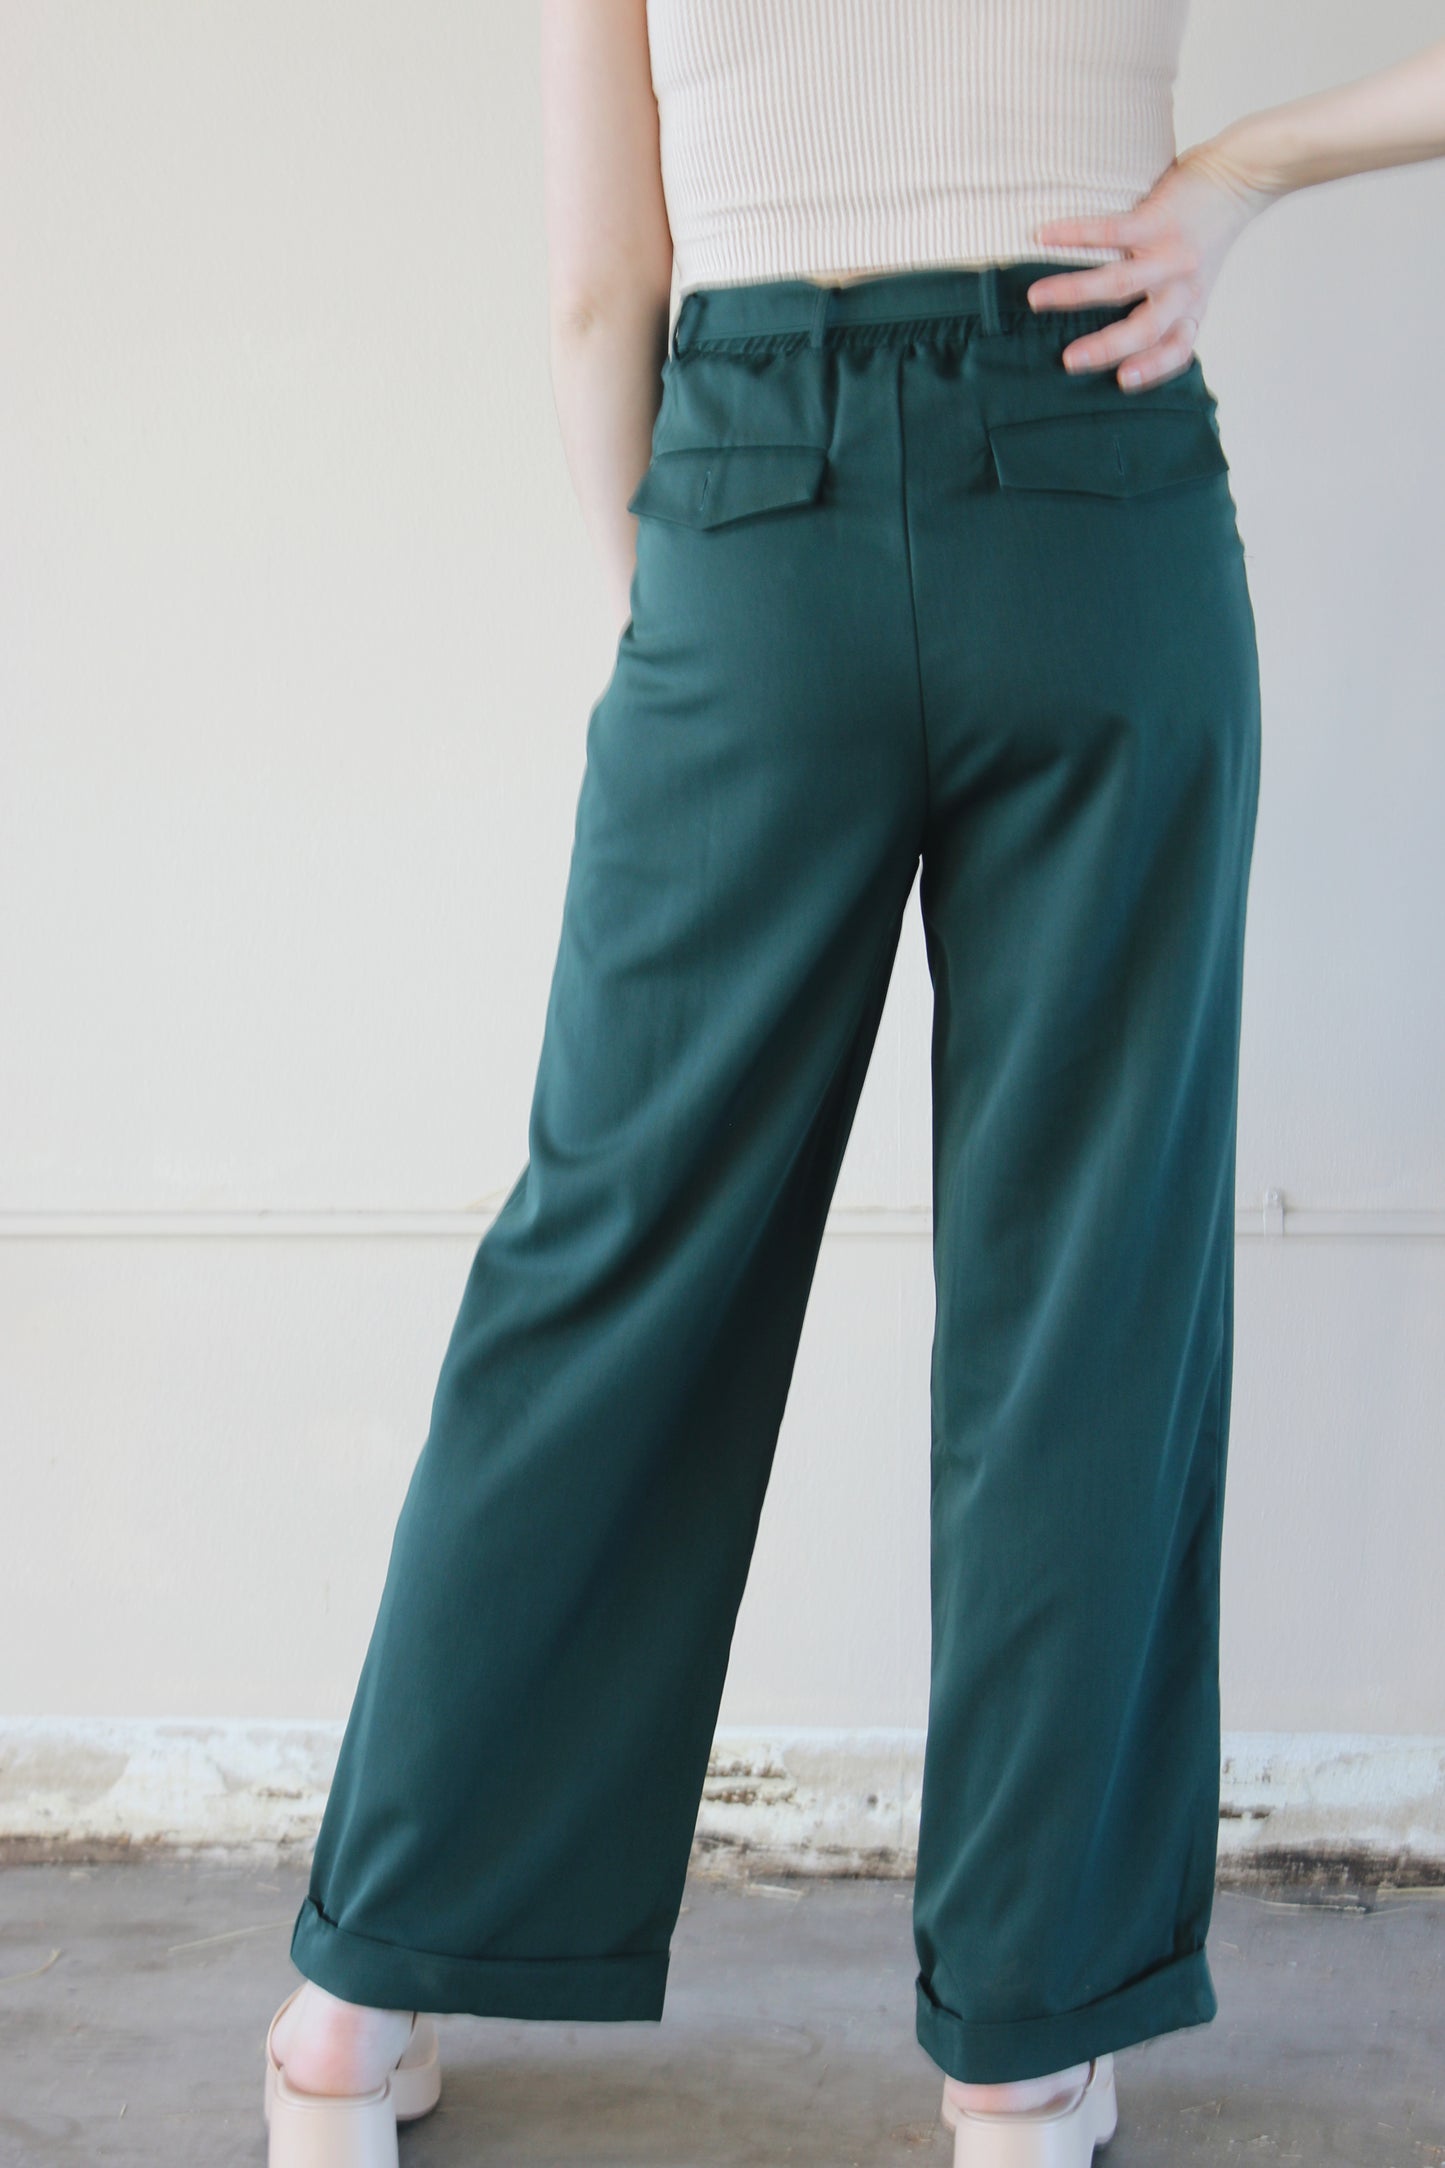 straight leg belted trousers with cuffed hem, front pockets with front pleats, back pockets with flap and button enclosure